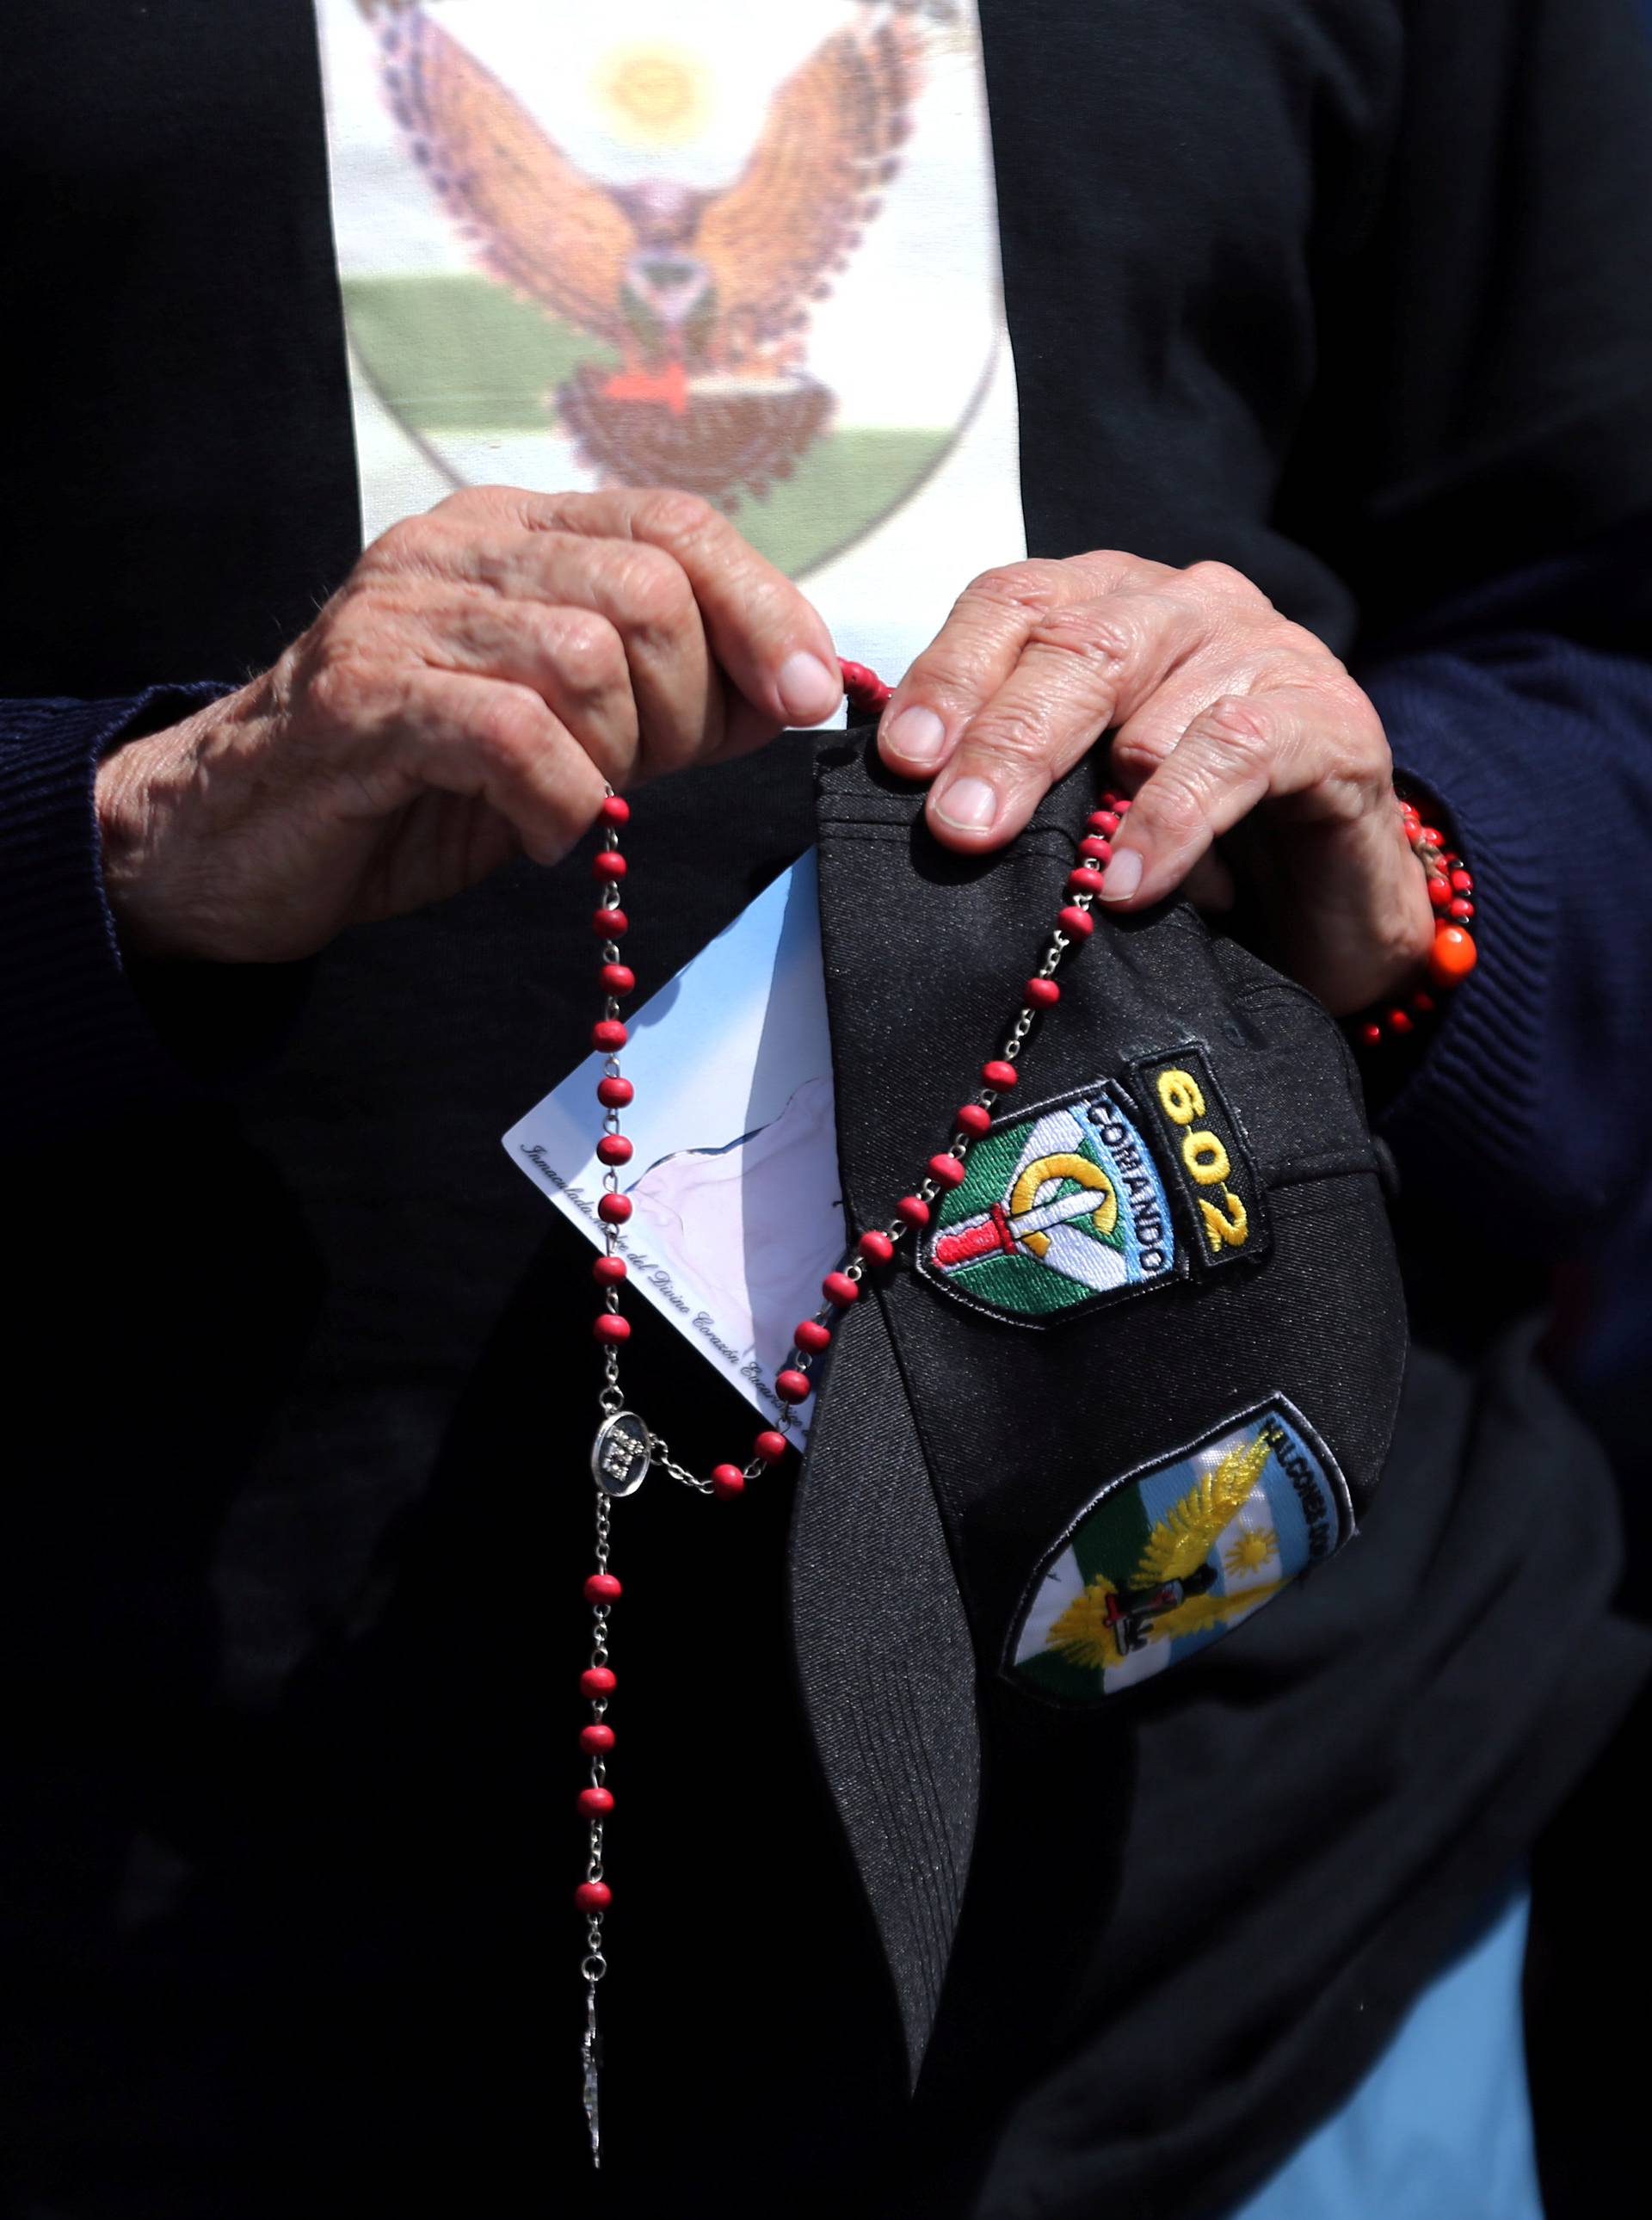 A man holds a rosary as he prays for the 44 crew members of the missing at sea ARA San Juan submarine, at the entrance of an Argentine Naval Base in Mar del Plata